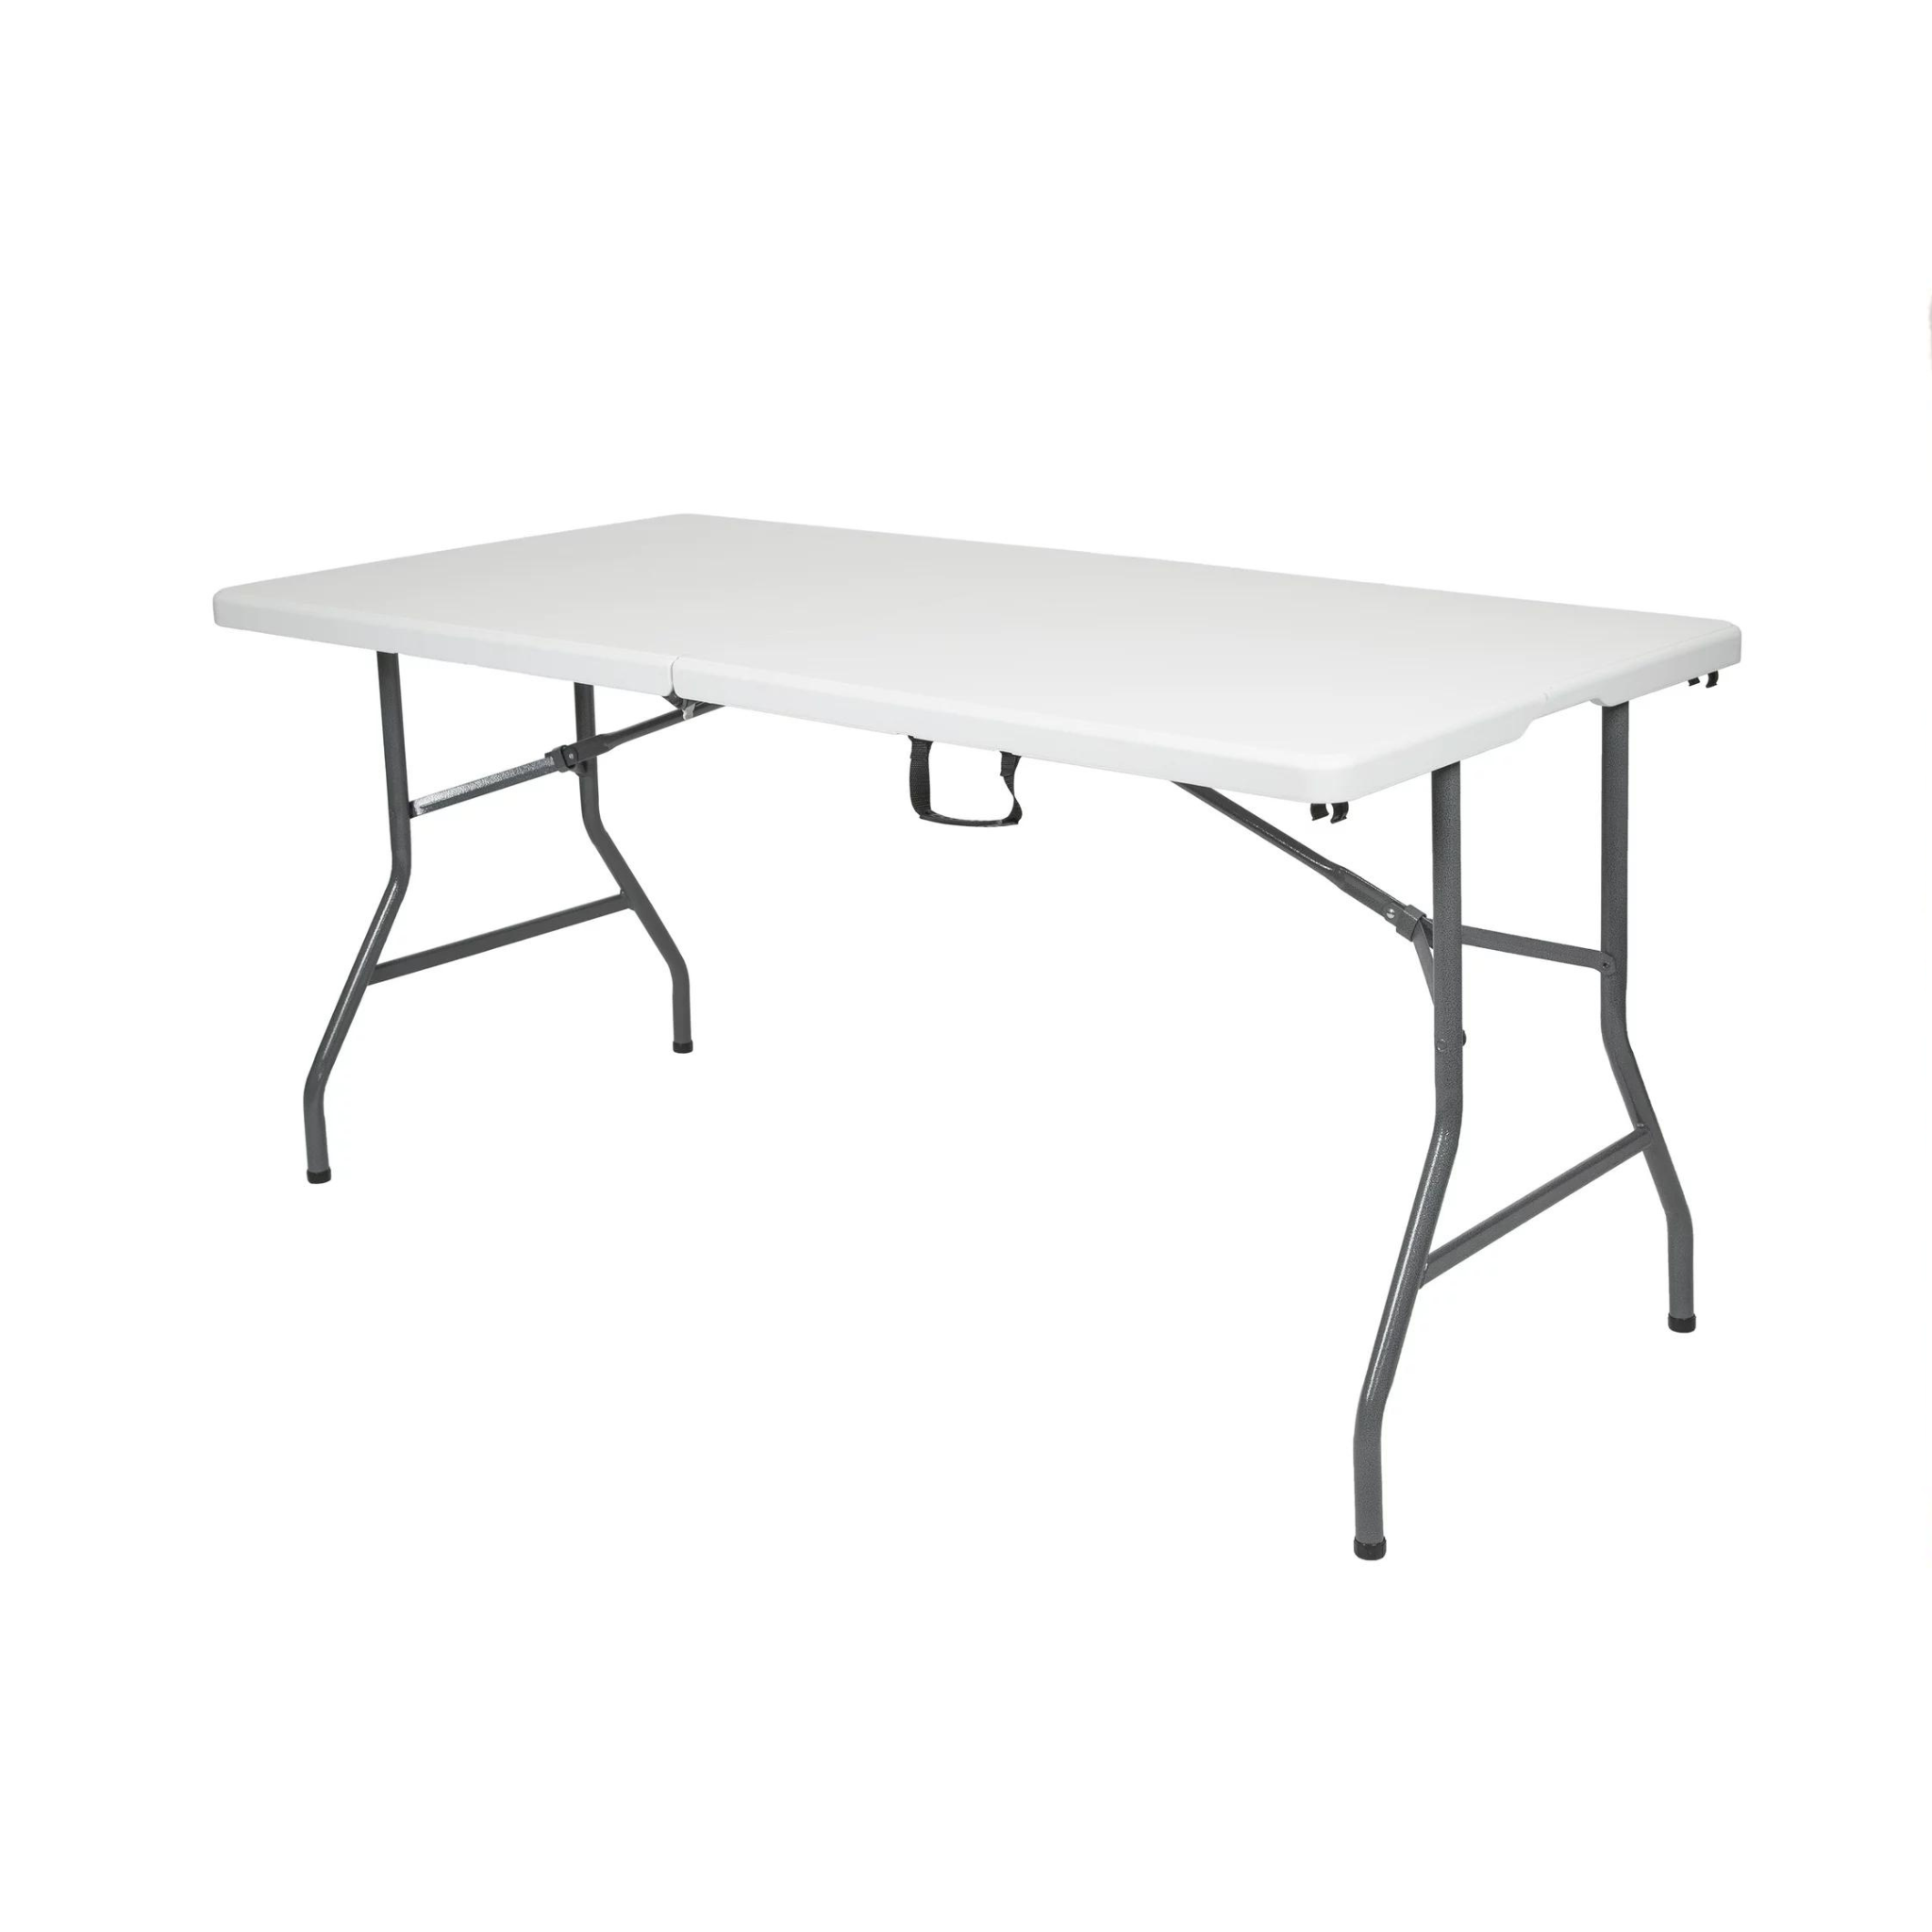 Stansport 5-Ft Camping Folding Table